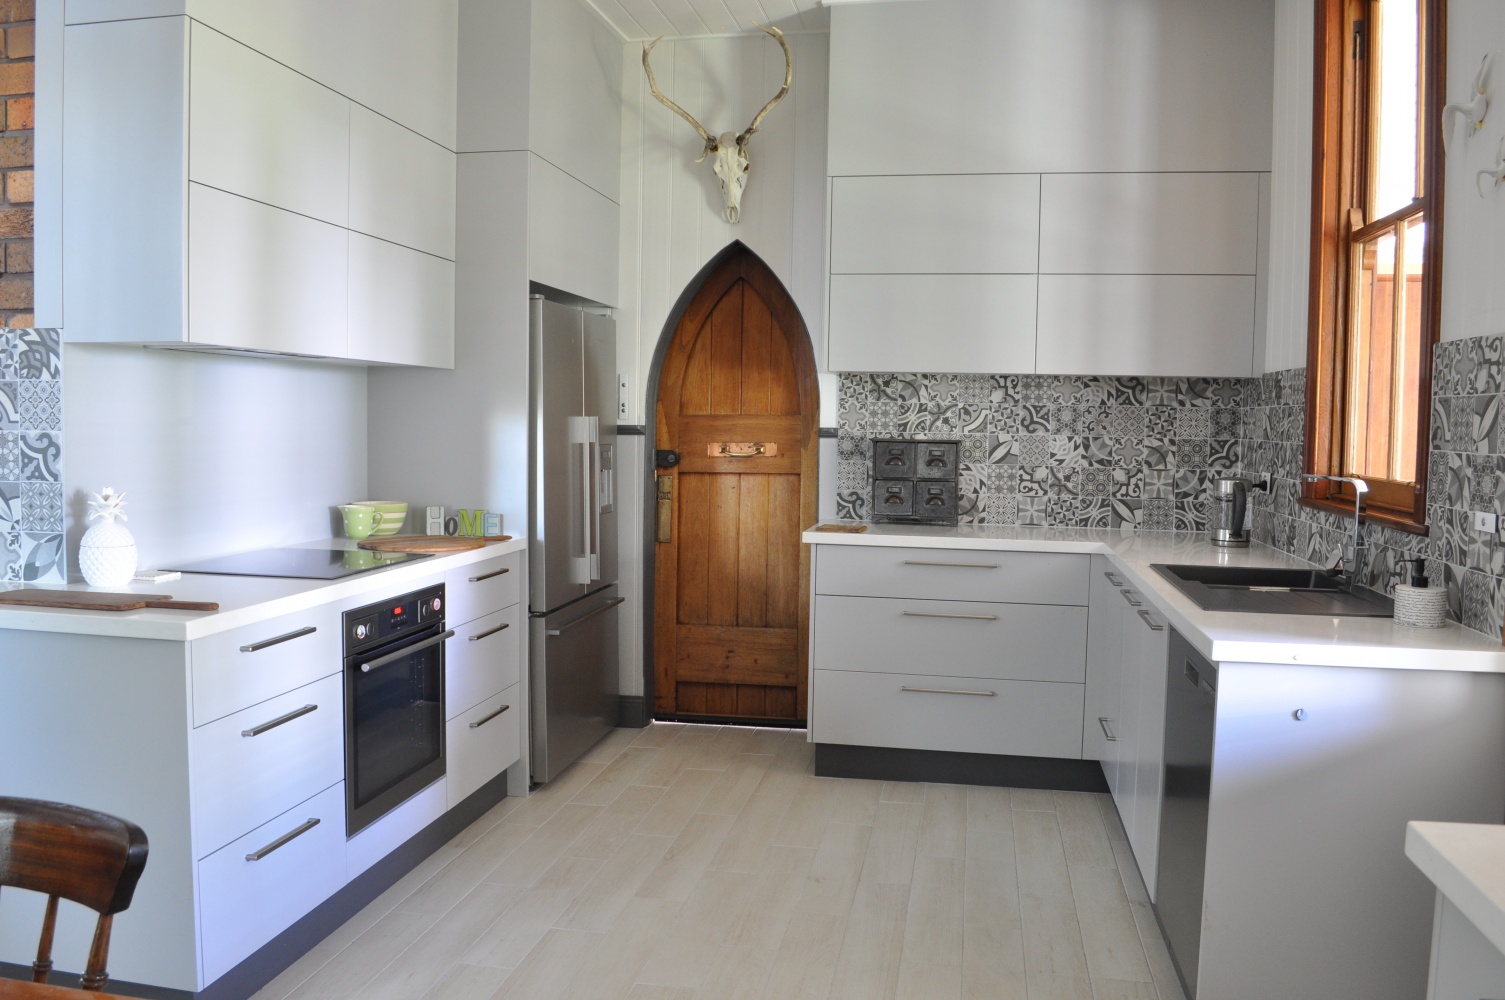 CDCM Kitchens + Bathrooms Kitchens, Bathrooms and Cabinetry featuring high quality design and workmanship